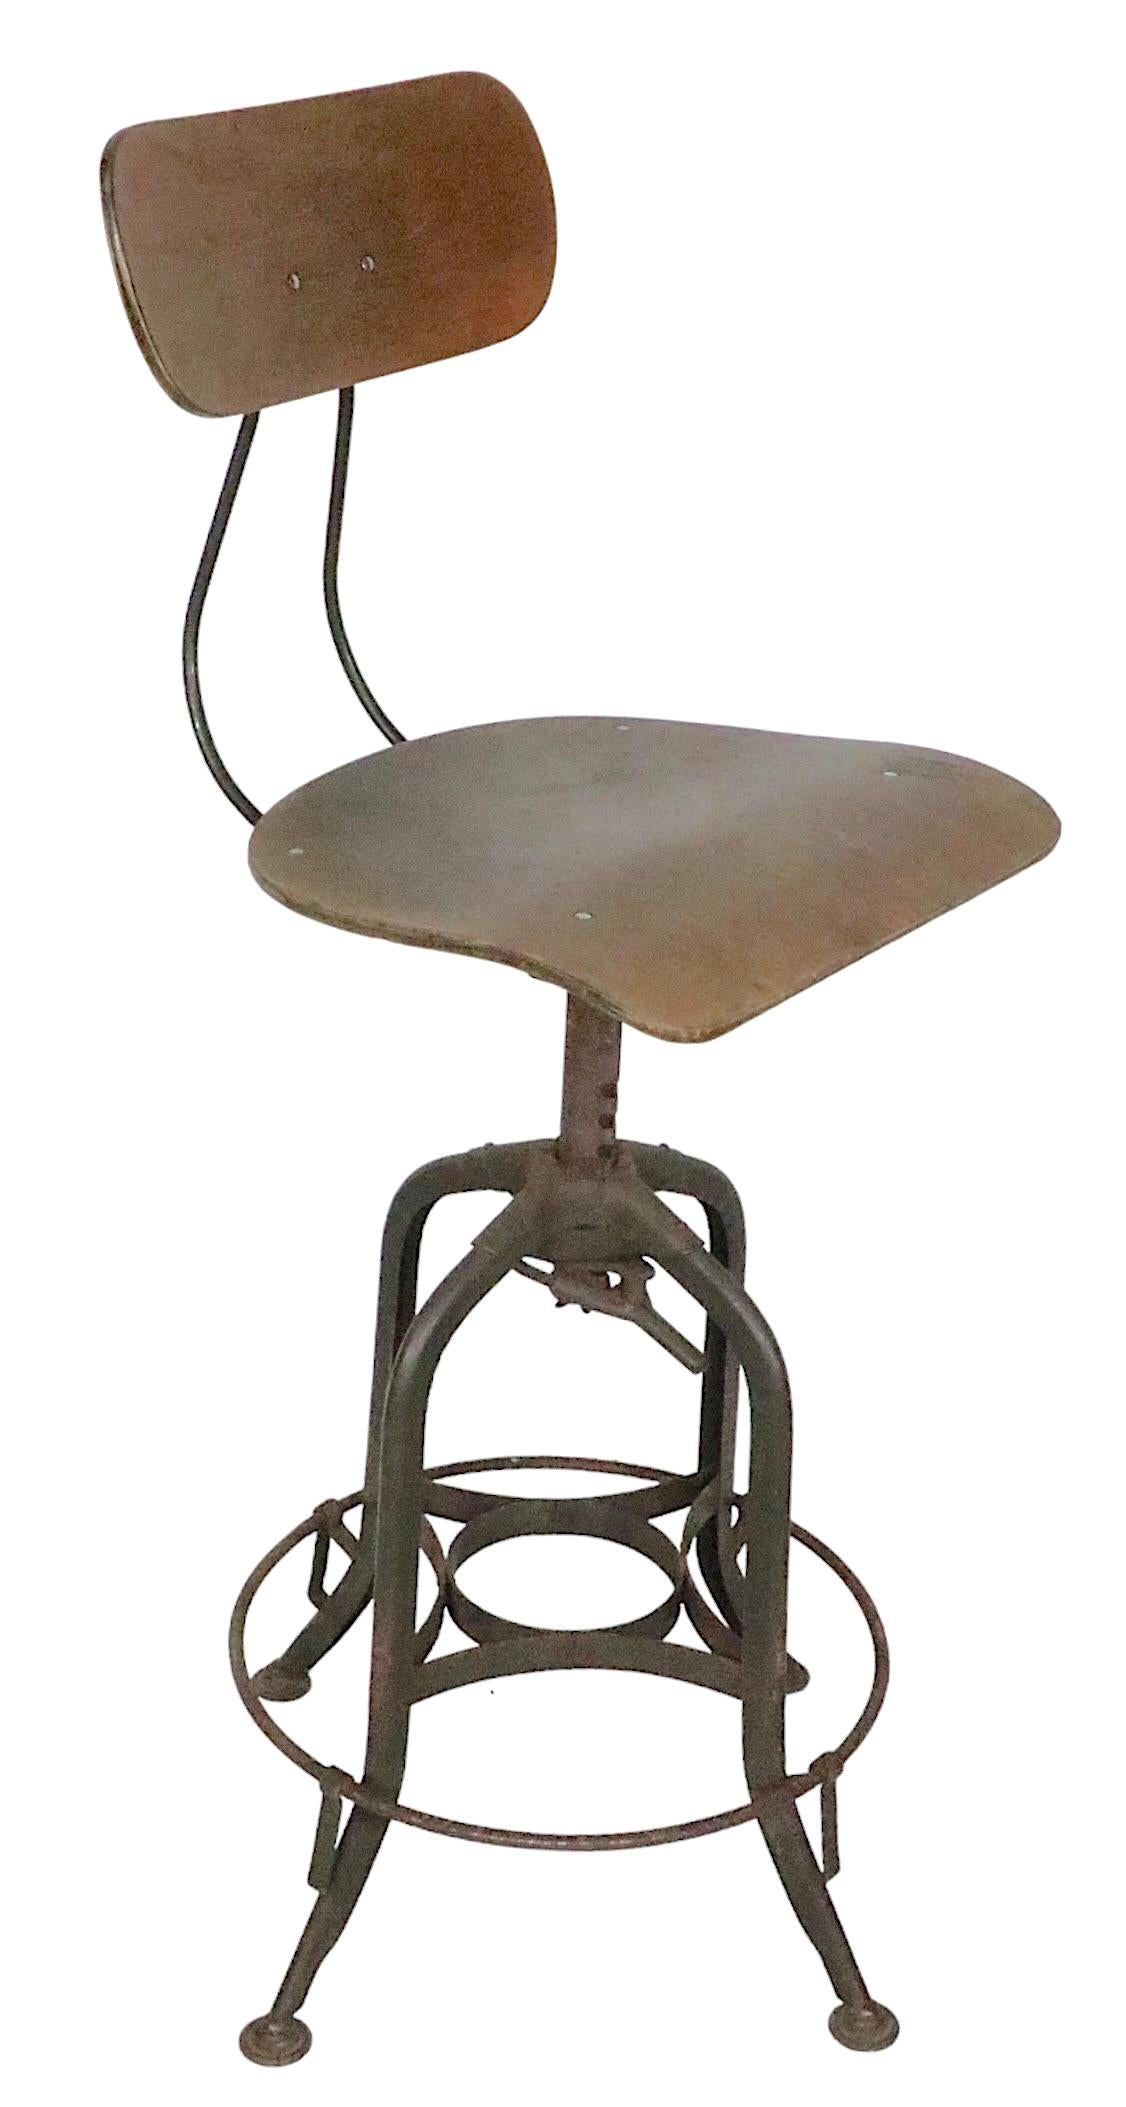 Mid-20th Century Vintage 1930s Industrial Rask Work Drafting Stool by Toledo Furniture Company